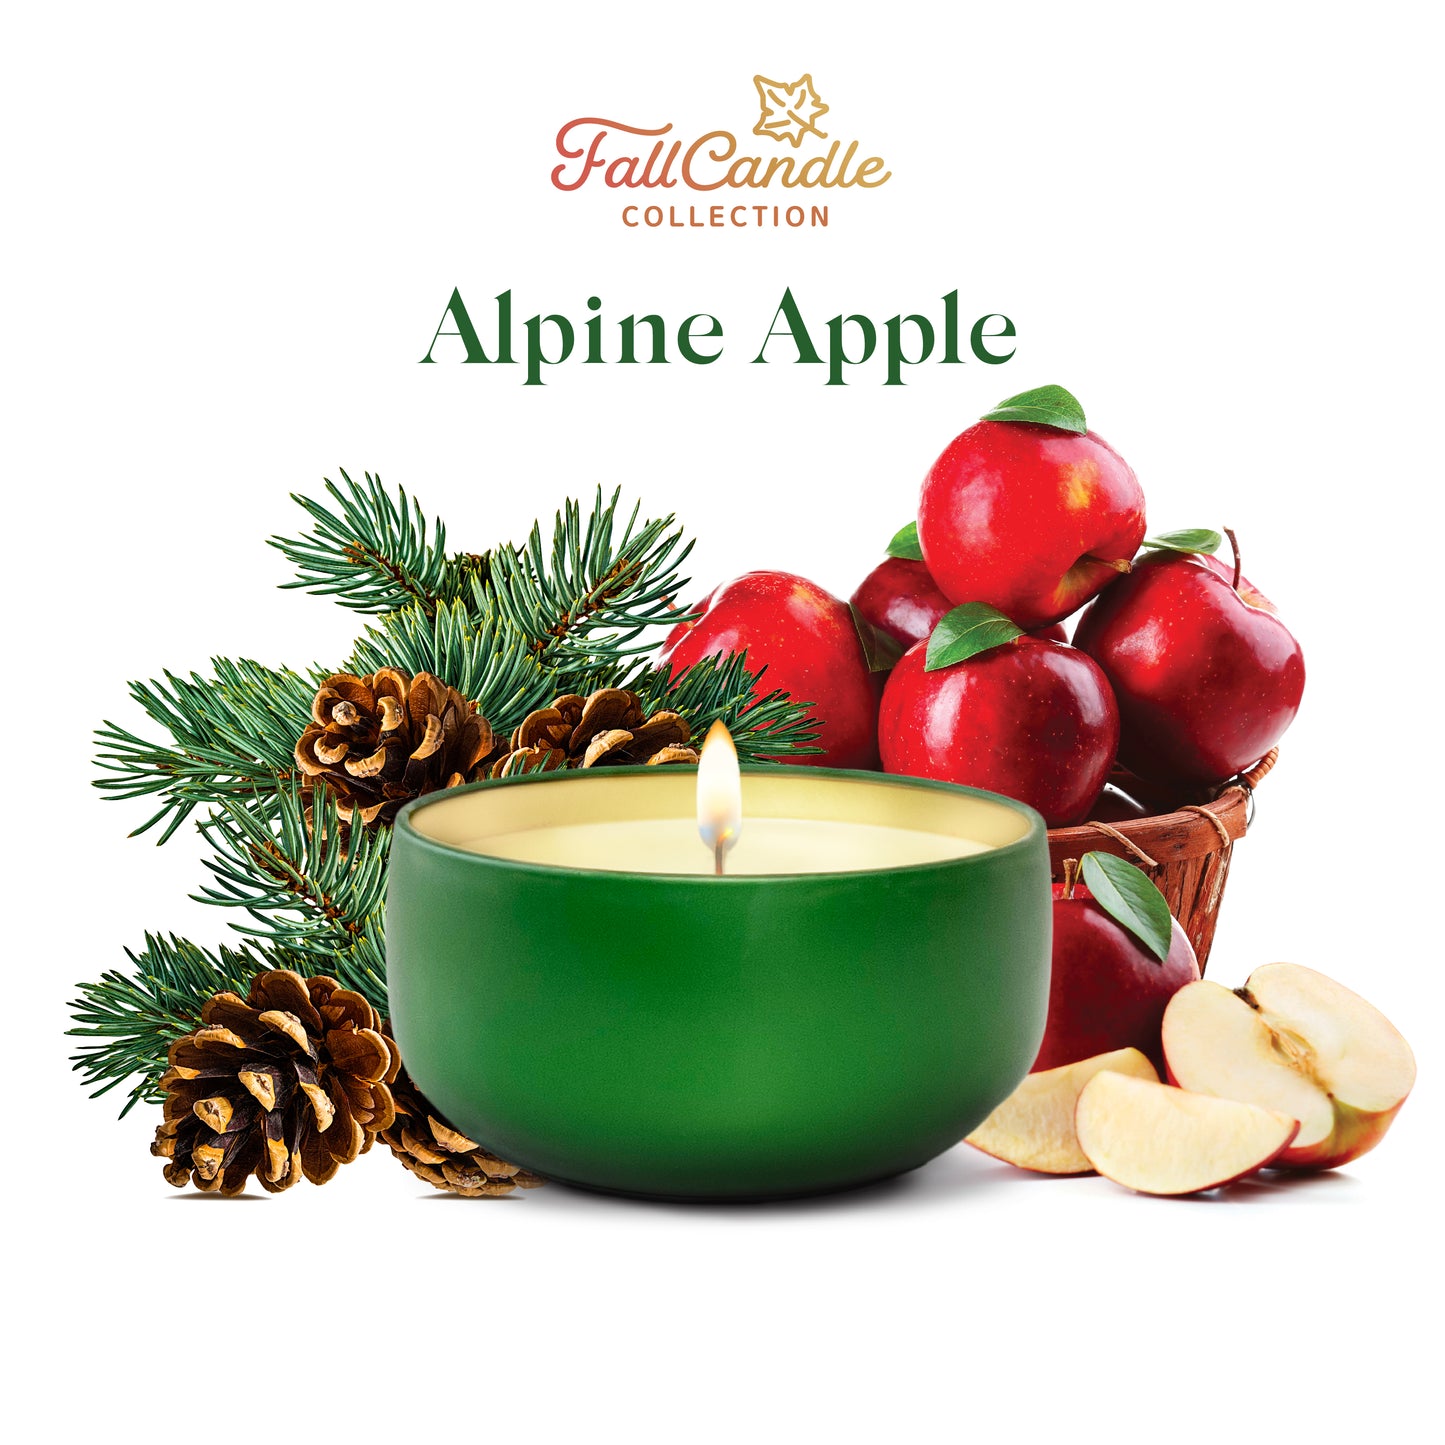 Alpine Apple - Fall Candle Collection - 6.5 oz Tin